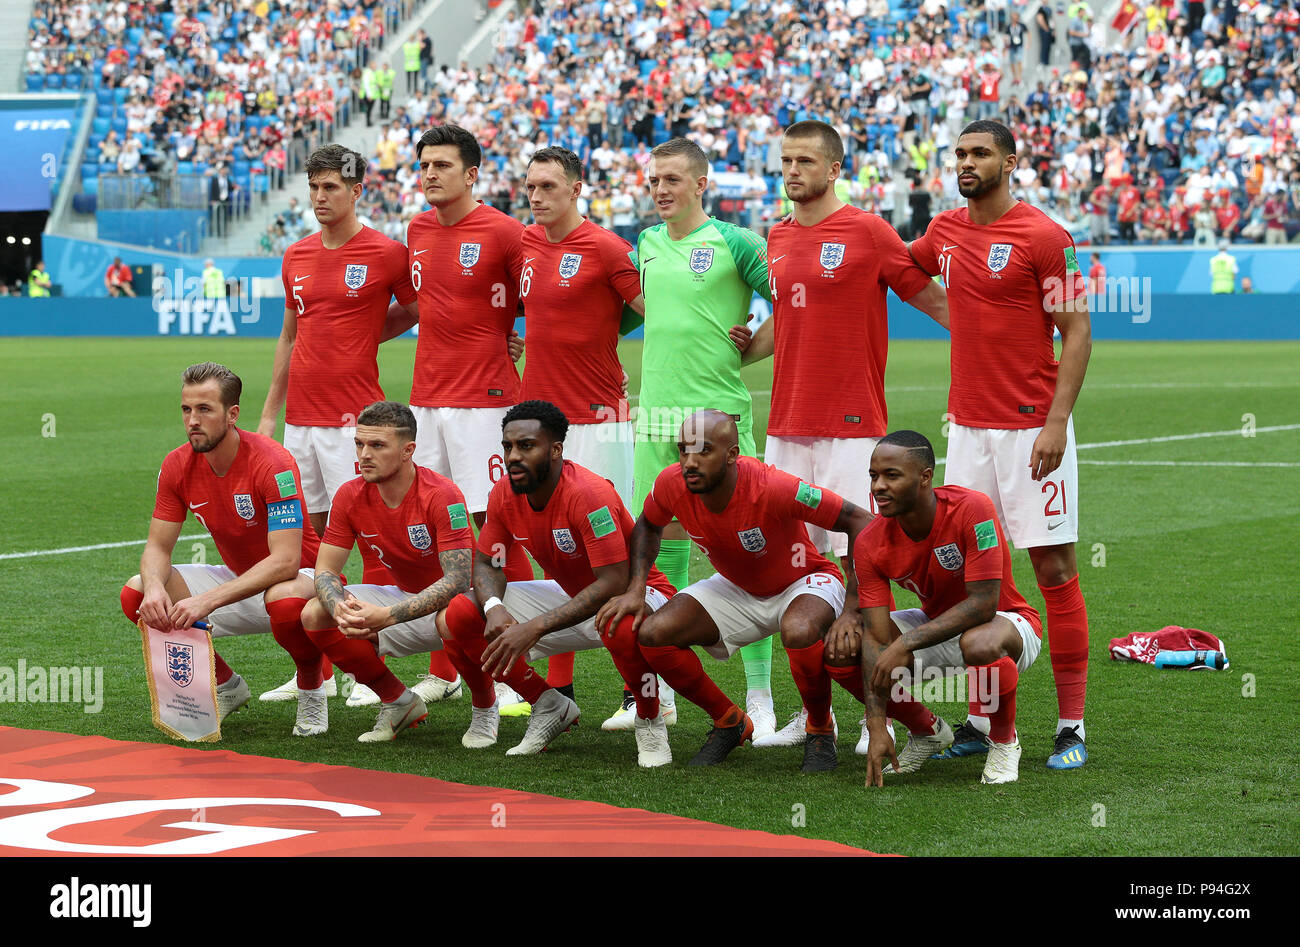 Back row, left to right, England's John Stones, Harry Maguire, Phil Jones, Jordan Pickford, Eric Dier and Ruben Loftus-Cheek. Front row, left to right, England's Harry Kane, Kieran Trippier, Danny Rose, Fabian Delph and Raheem Sterling line up before the FIFA World Cup third place play-off match at Saint Petersburg Stadium. PRESS ASSOCIATION Photo. Picture date: Saturday July 14, 2018. See PA story WORLDCUP Belgium. Photo credit should read: Aaron Chown/PA Wire. RESTRICTIONS: Editorial use only. No commercial use. No use with any unofficial 3rd party logos. No manipulation of images. No video  Stock Photo